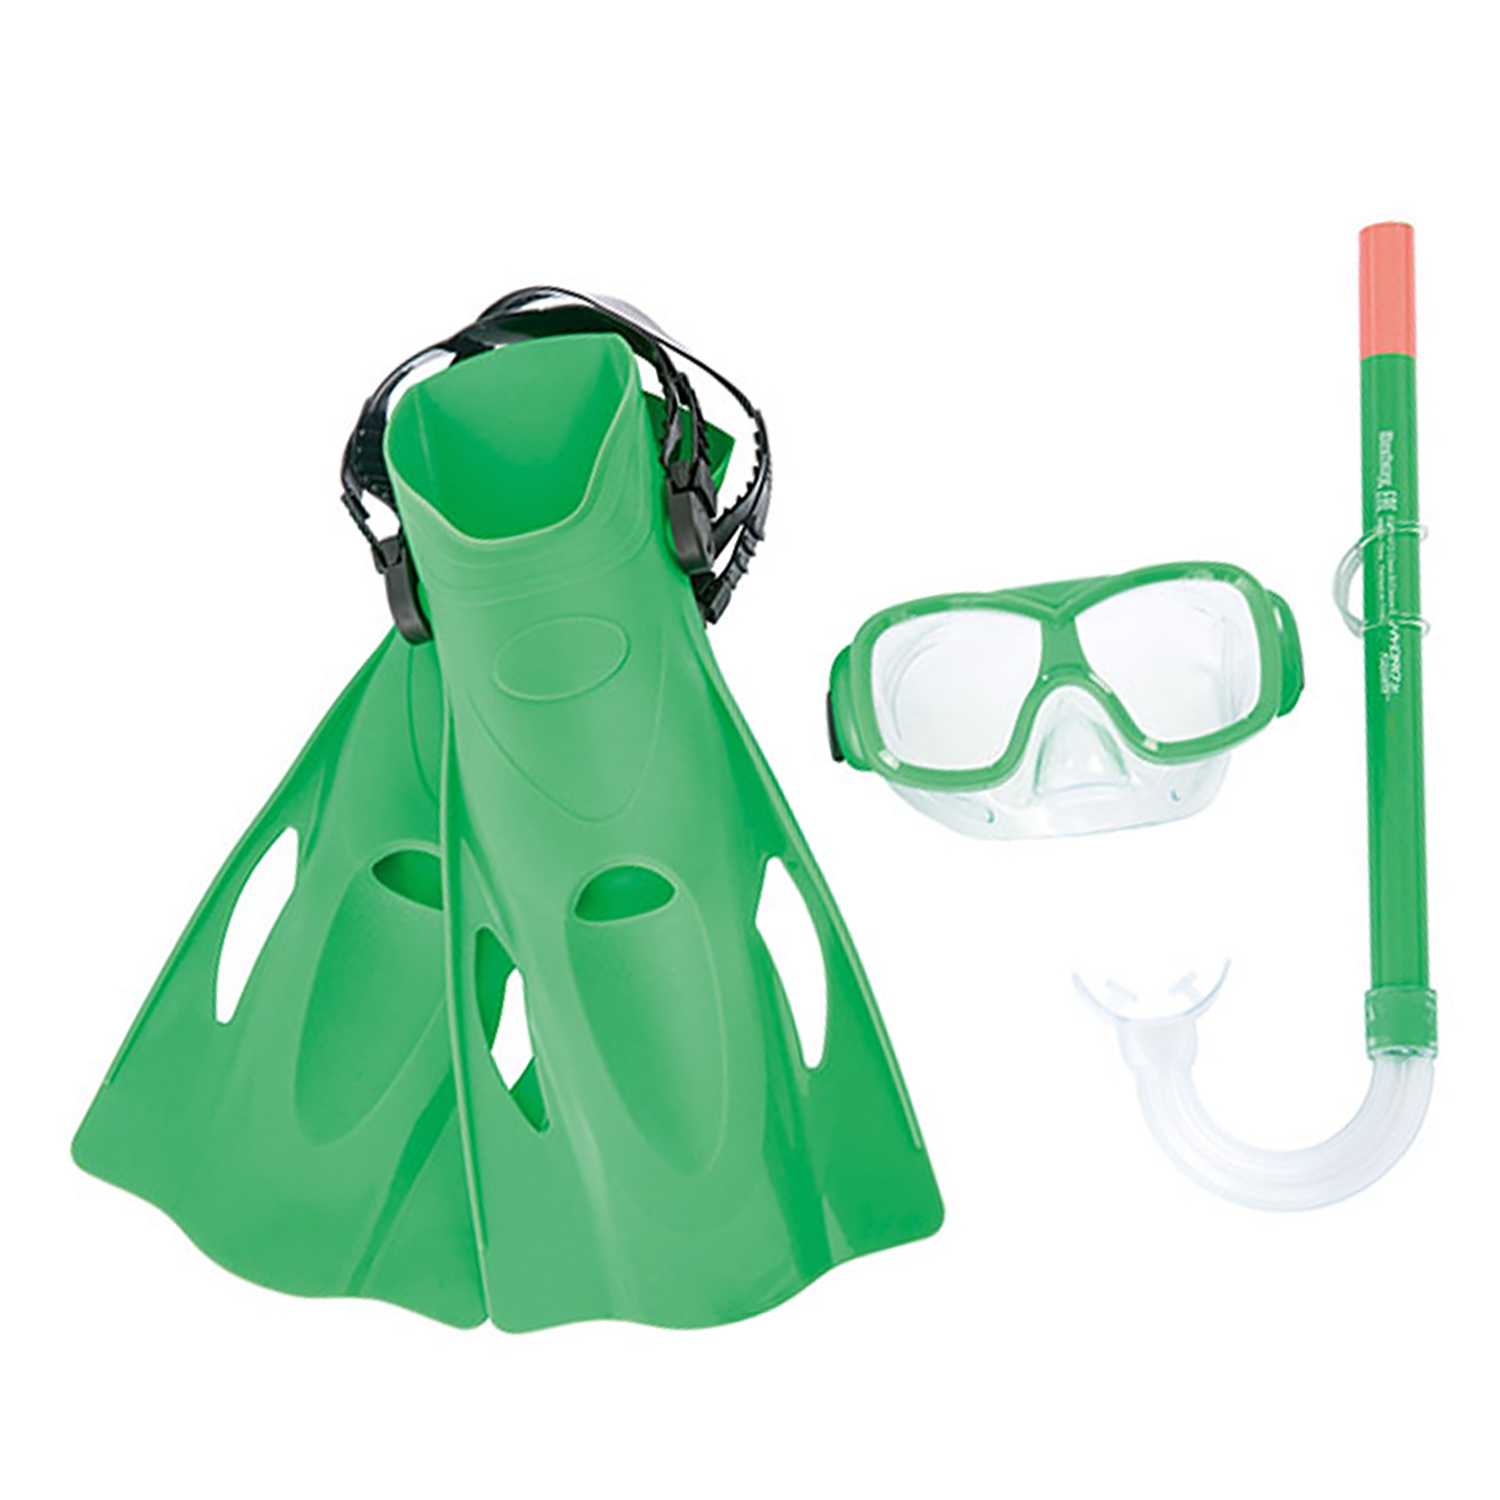 Essential freestyle snorkel set - Youth 7+